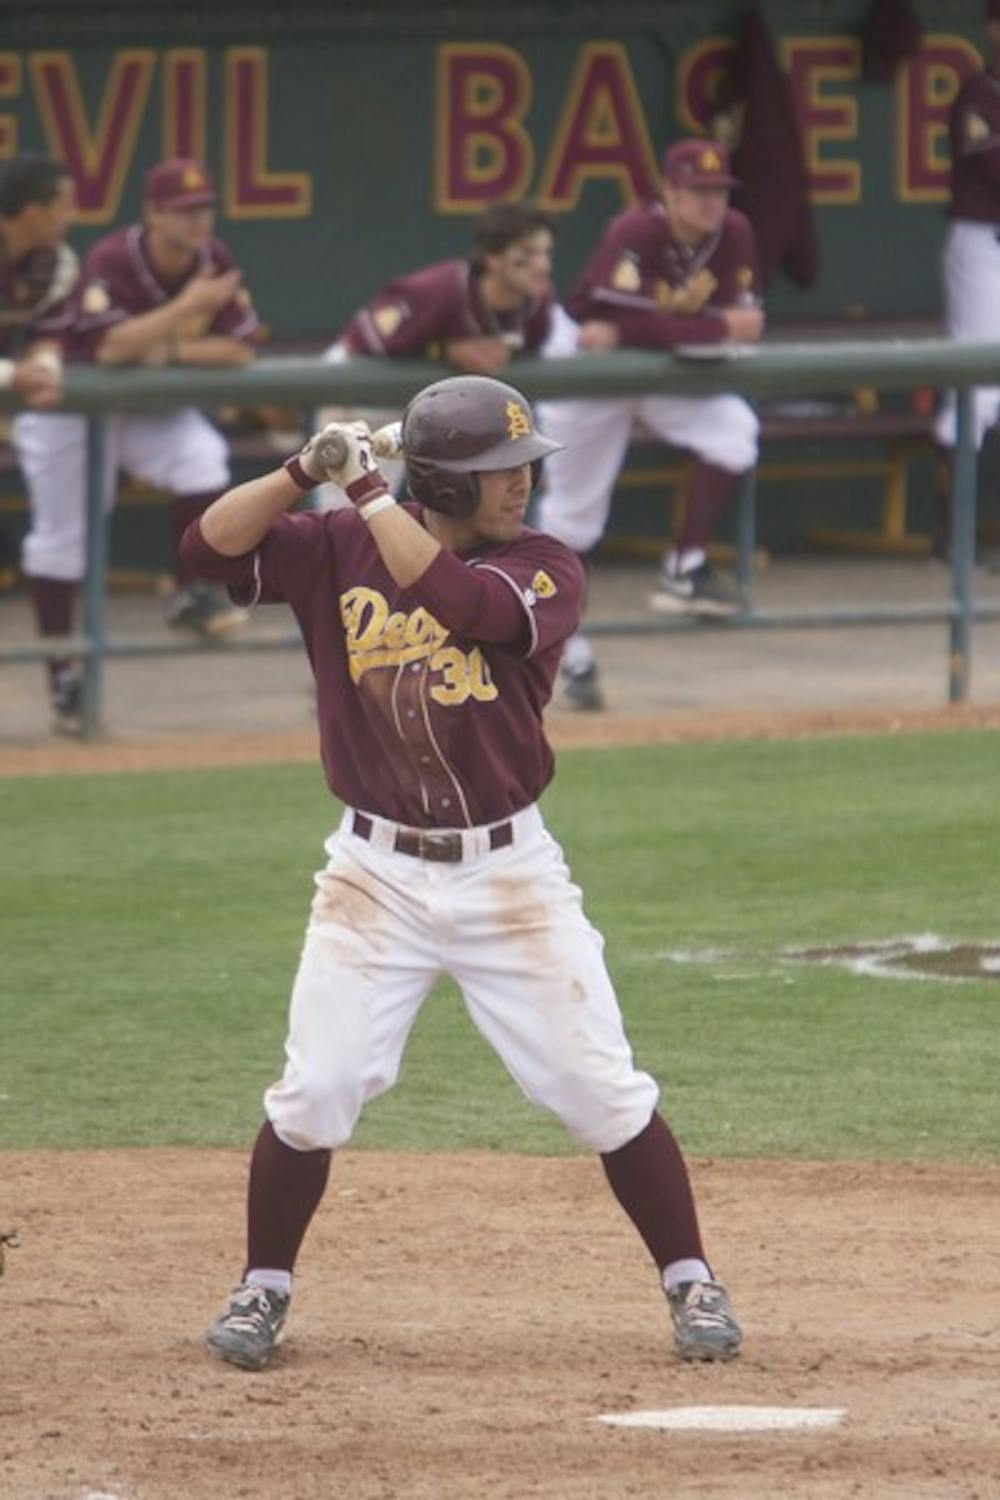 BIG CONTRIBUTOR: Sophomore infielder Riccio Torrez is part of a well-rounded ASU offense that has seen multiple players contribute to the Sun Devils’ 11-0 start. (Photo by Kyle Thompson)